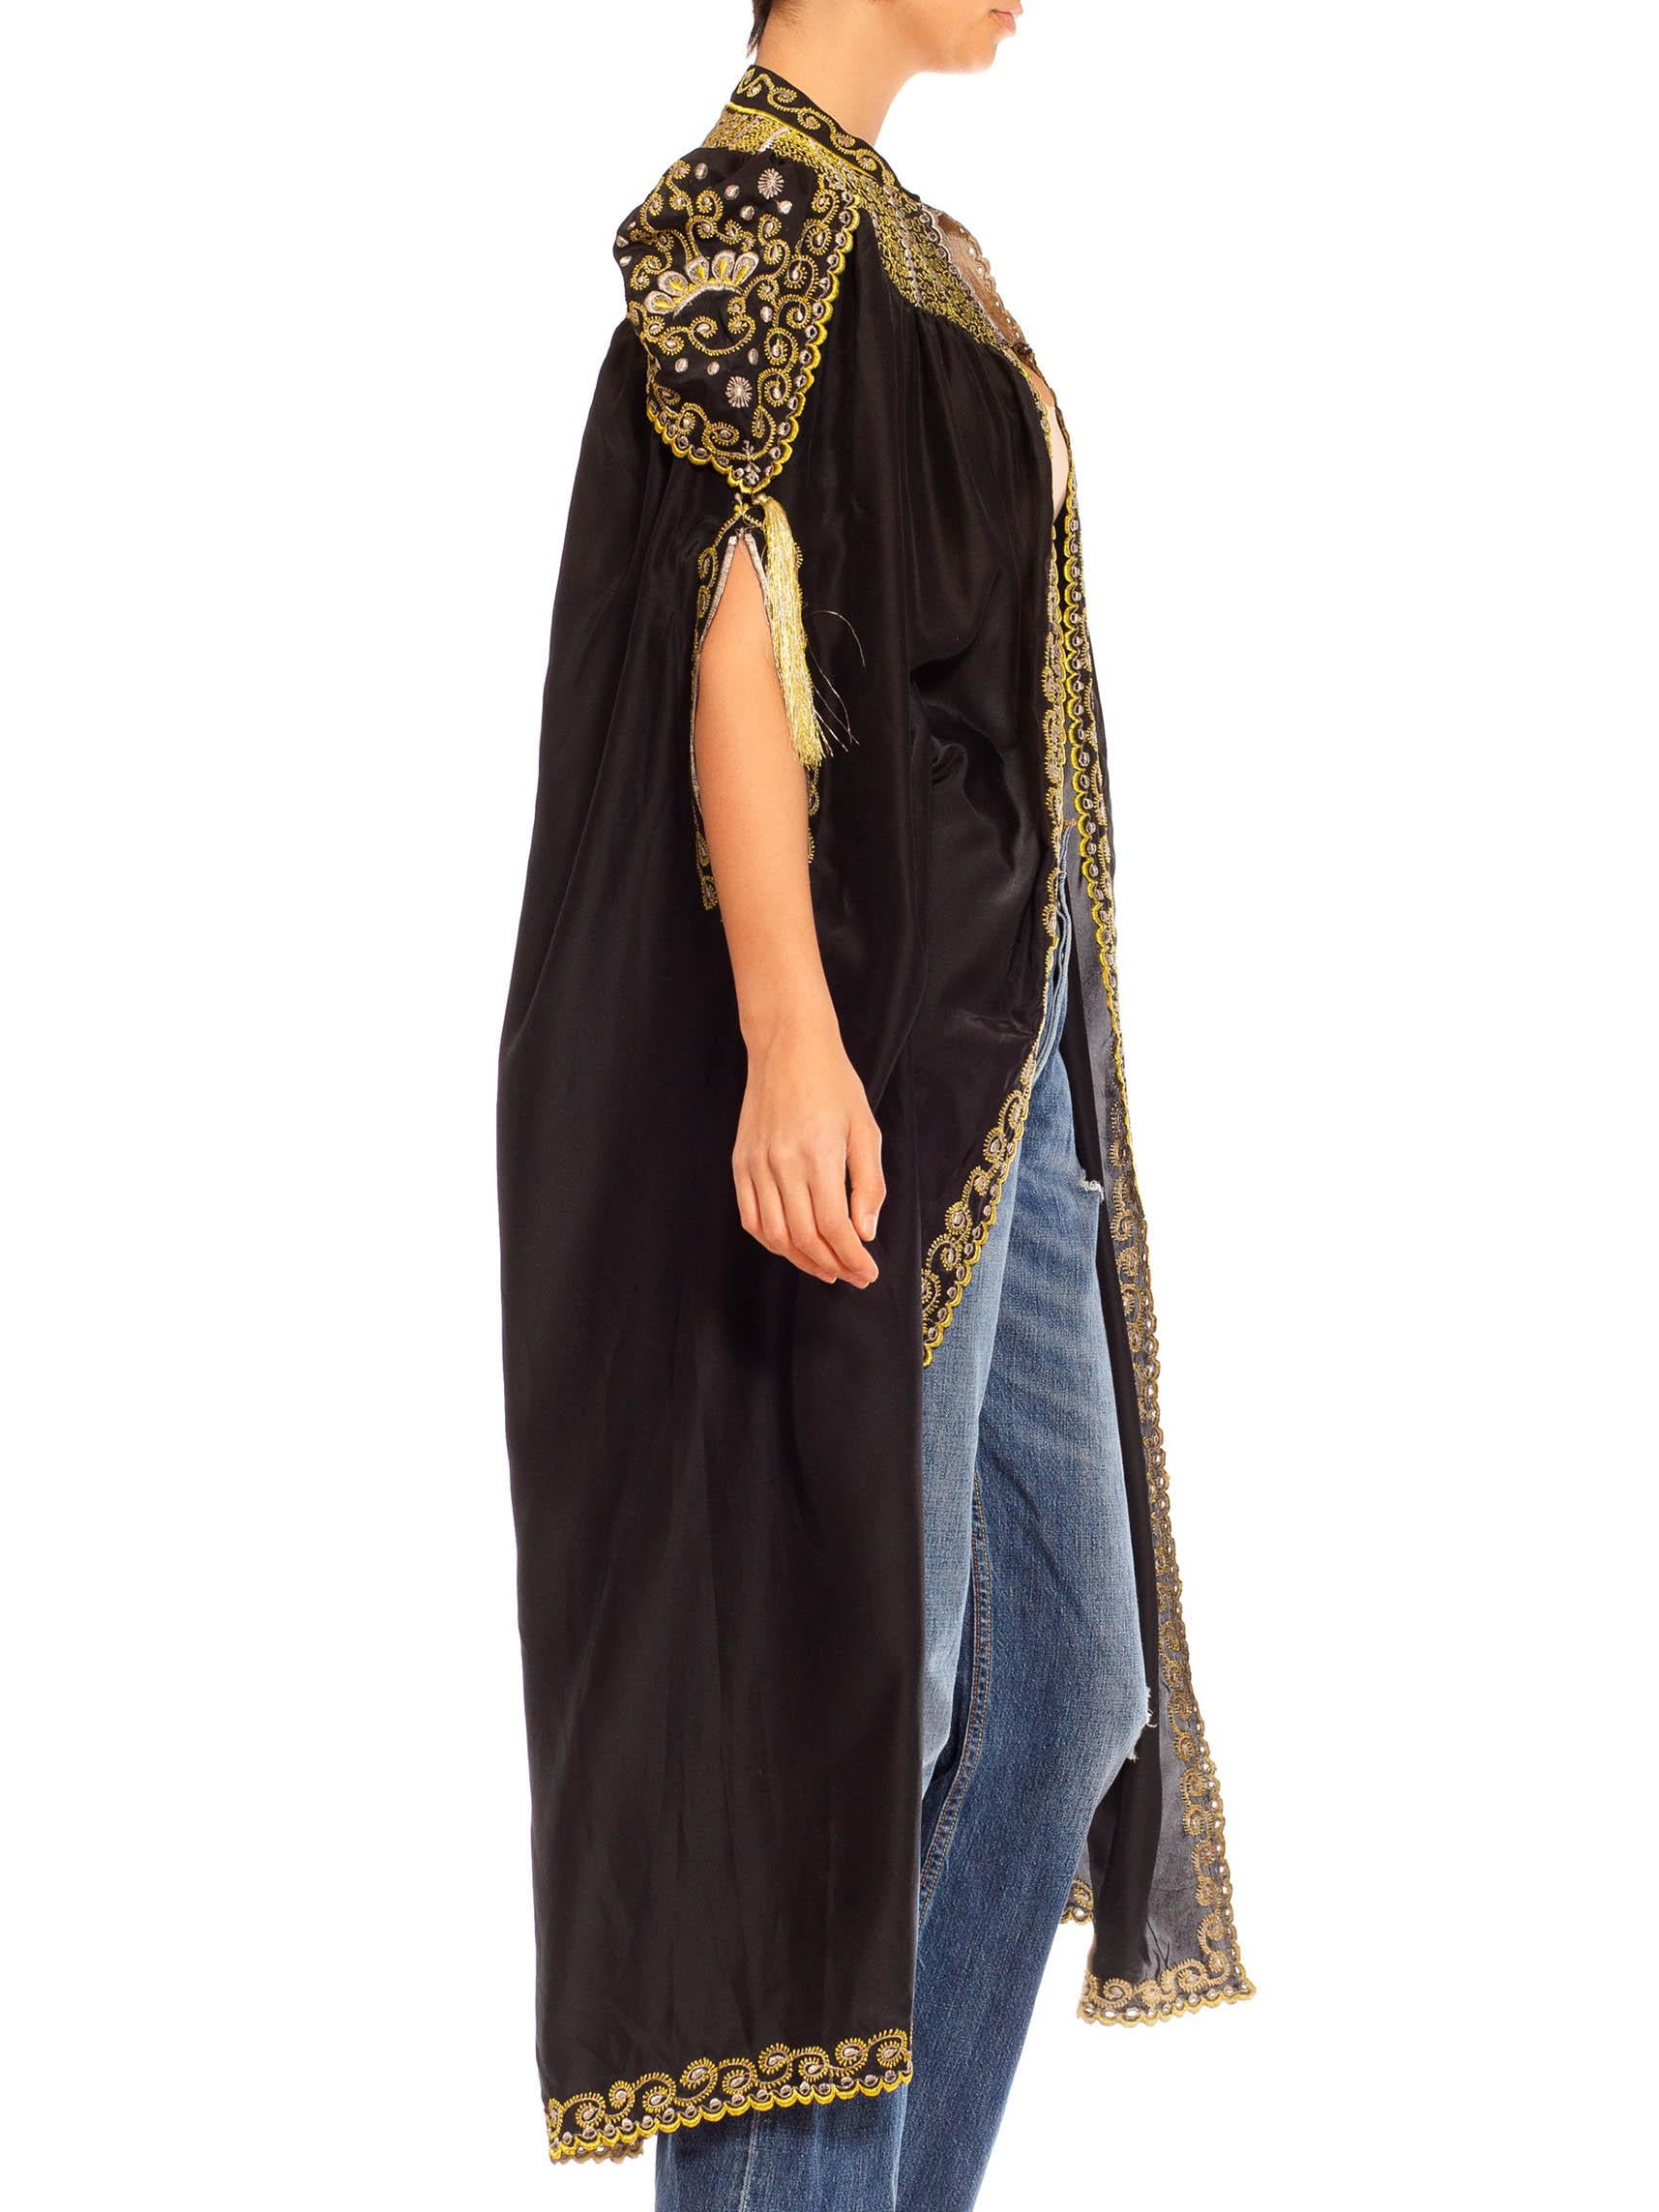 Women's or Men's 1970S Black Polyester Metallic Gold Embroidered Cape